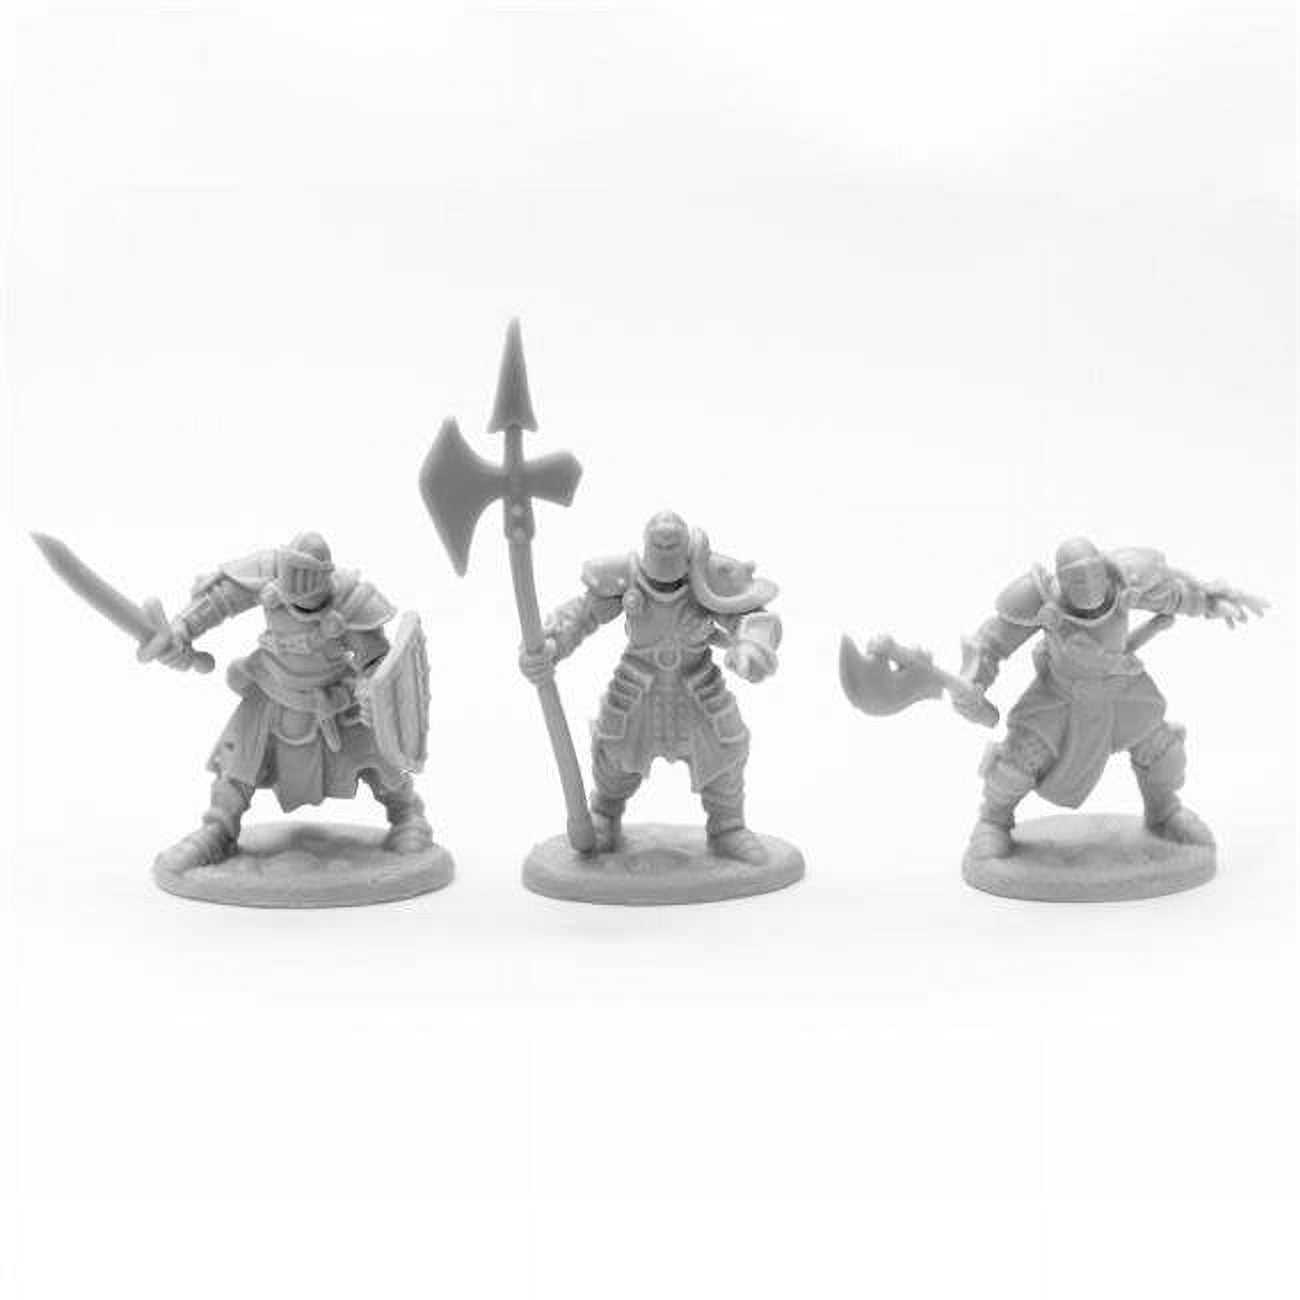 Picture of Reaper Miniatures REM77673 Bones Knights of the Realm Miniatures